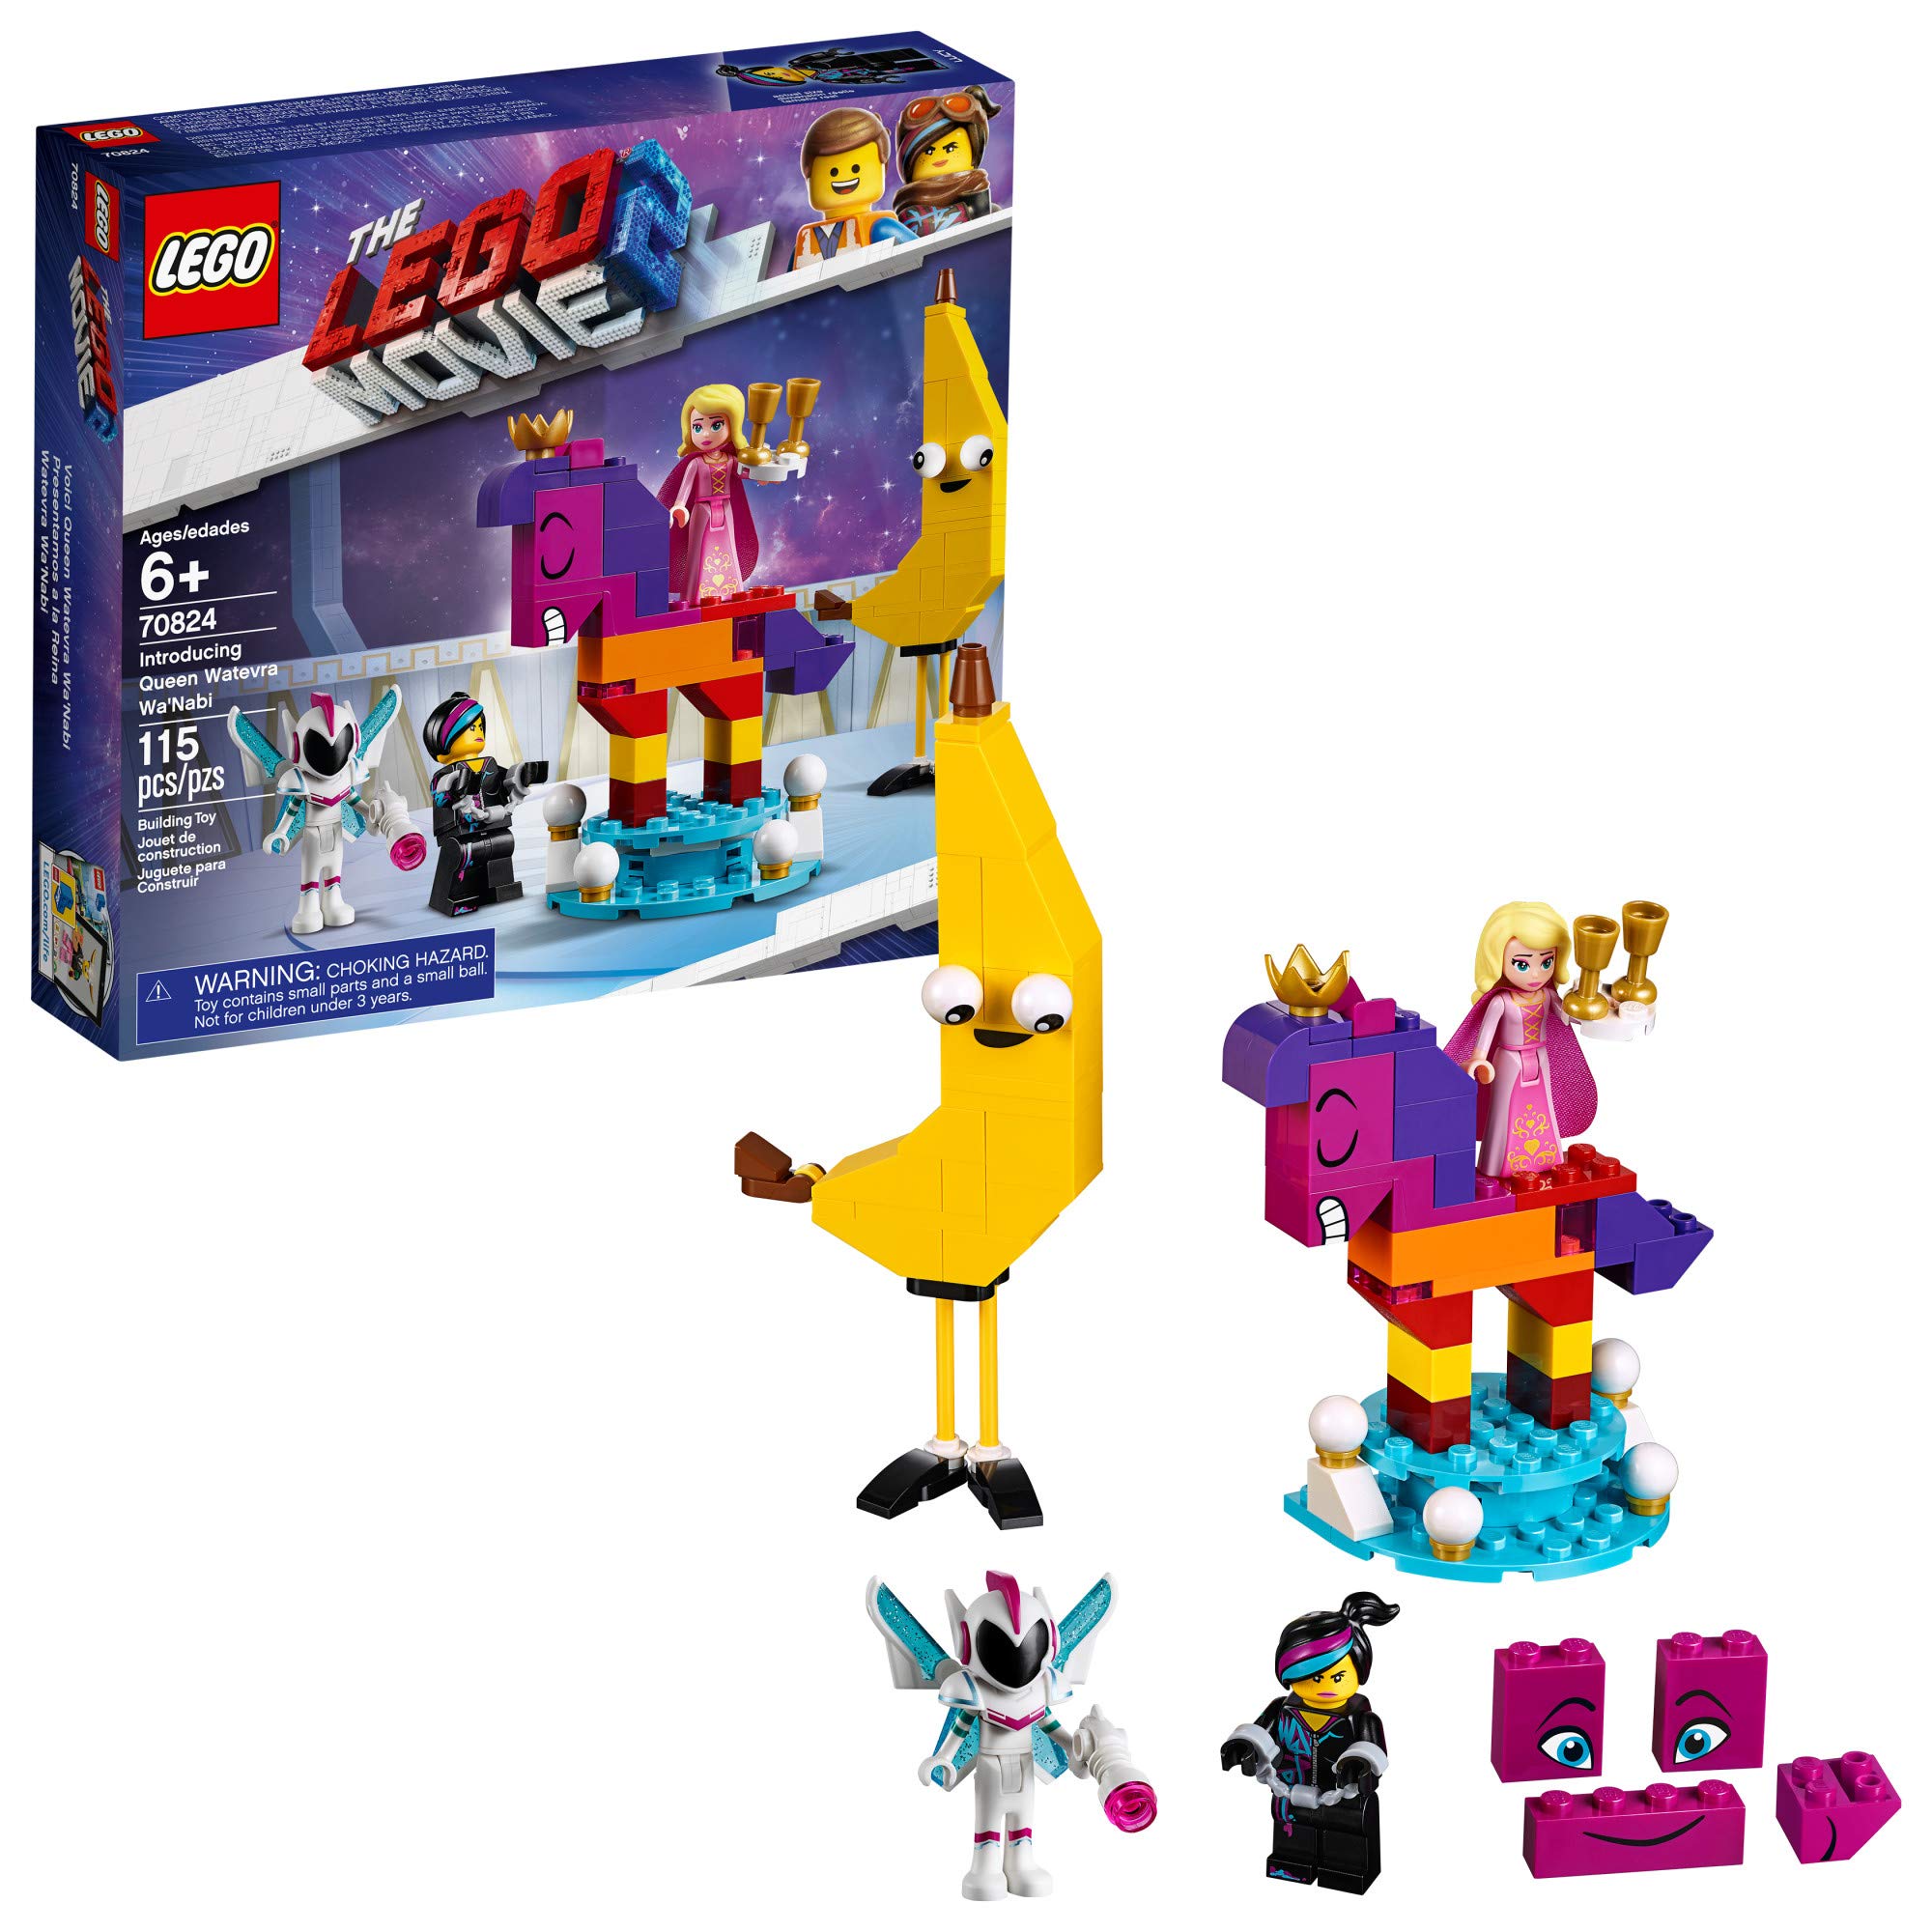 Book Cover LEGO The LEGO Movie 2 Introducing Queen Watevra Wa’Nabi 70824 Build and Play Kit Creative Building Playset for Girls and Boys, New 2019 (115 Piece)